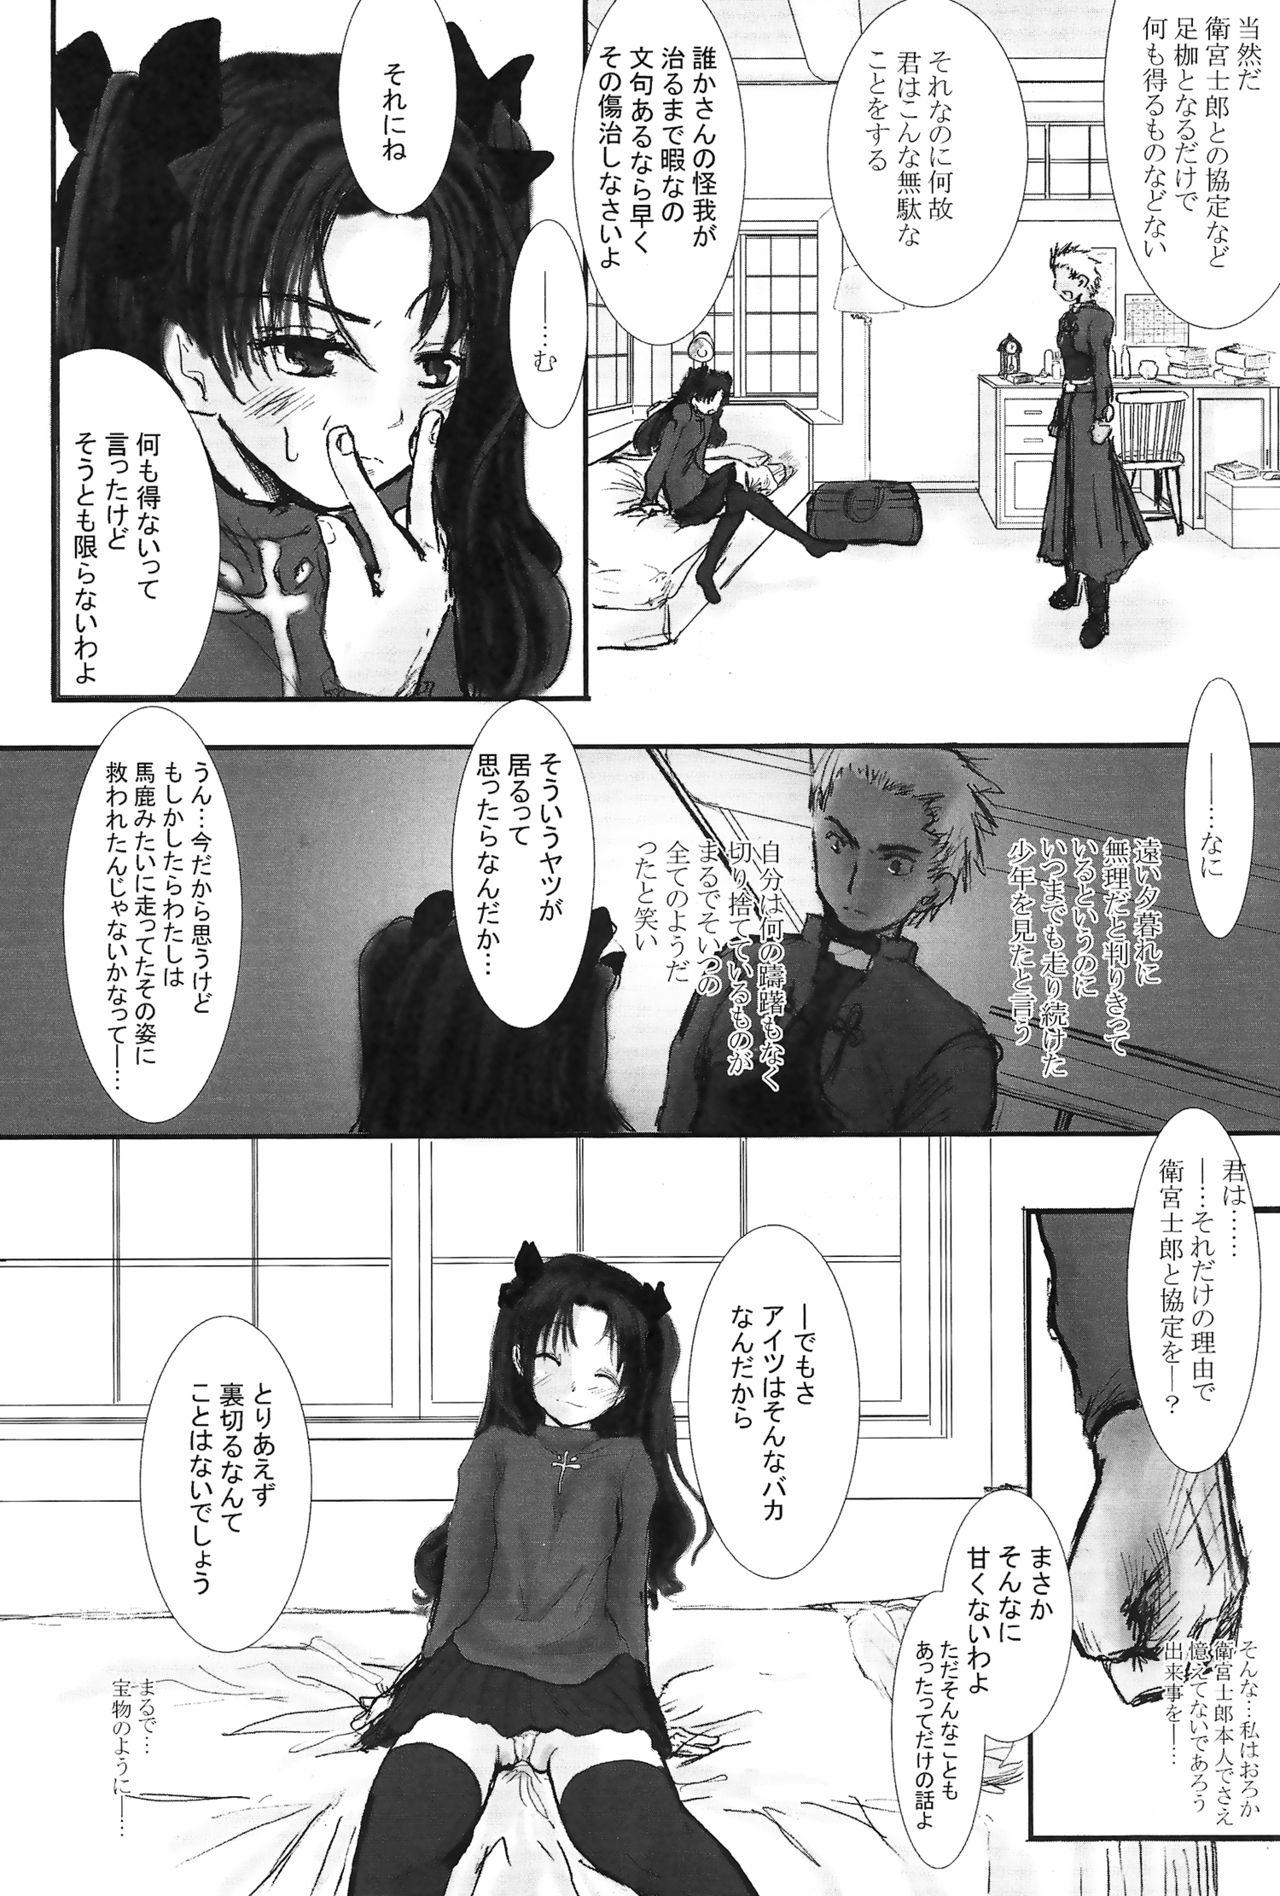 Atm Another/Answer - Fate stay night Transgender - Page 9